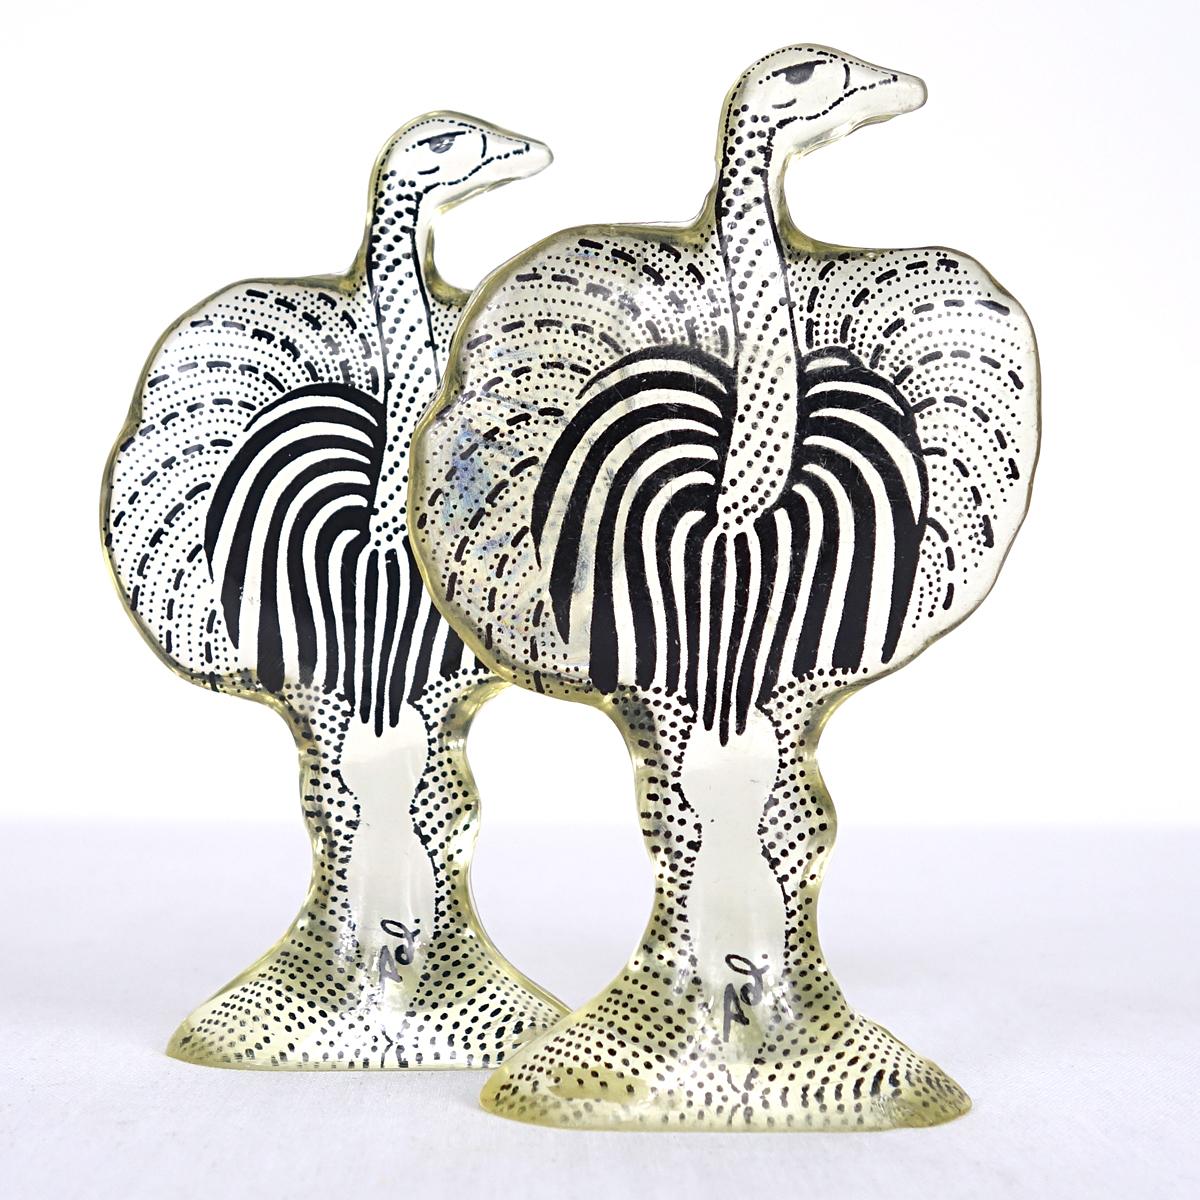 Pair of ostriches designed and made by Abraham Palatnik. Nice condition but one of them has some scratches when looked upon closely.

The Brazilian artist Abraham Palatnik (1928) was the founder of the technological movement in Brazilian art, and